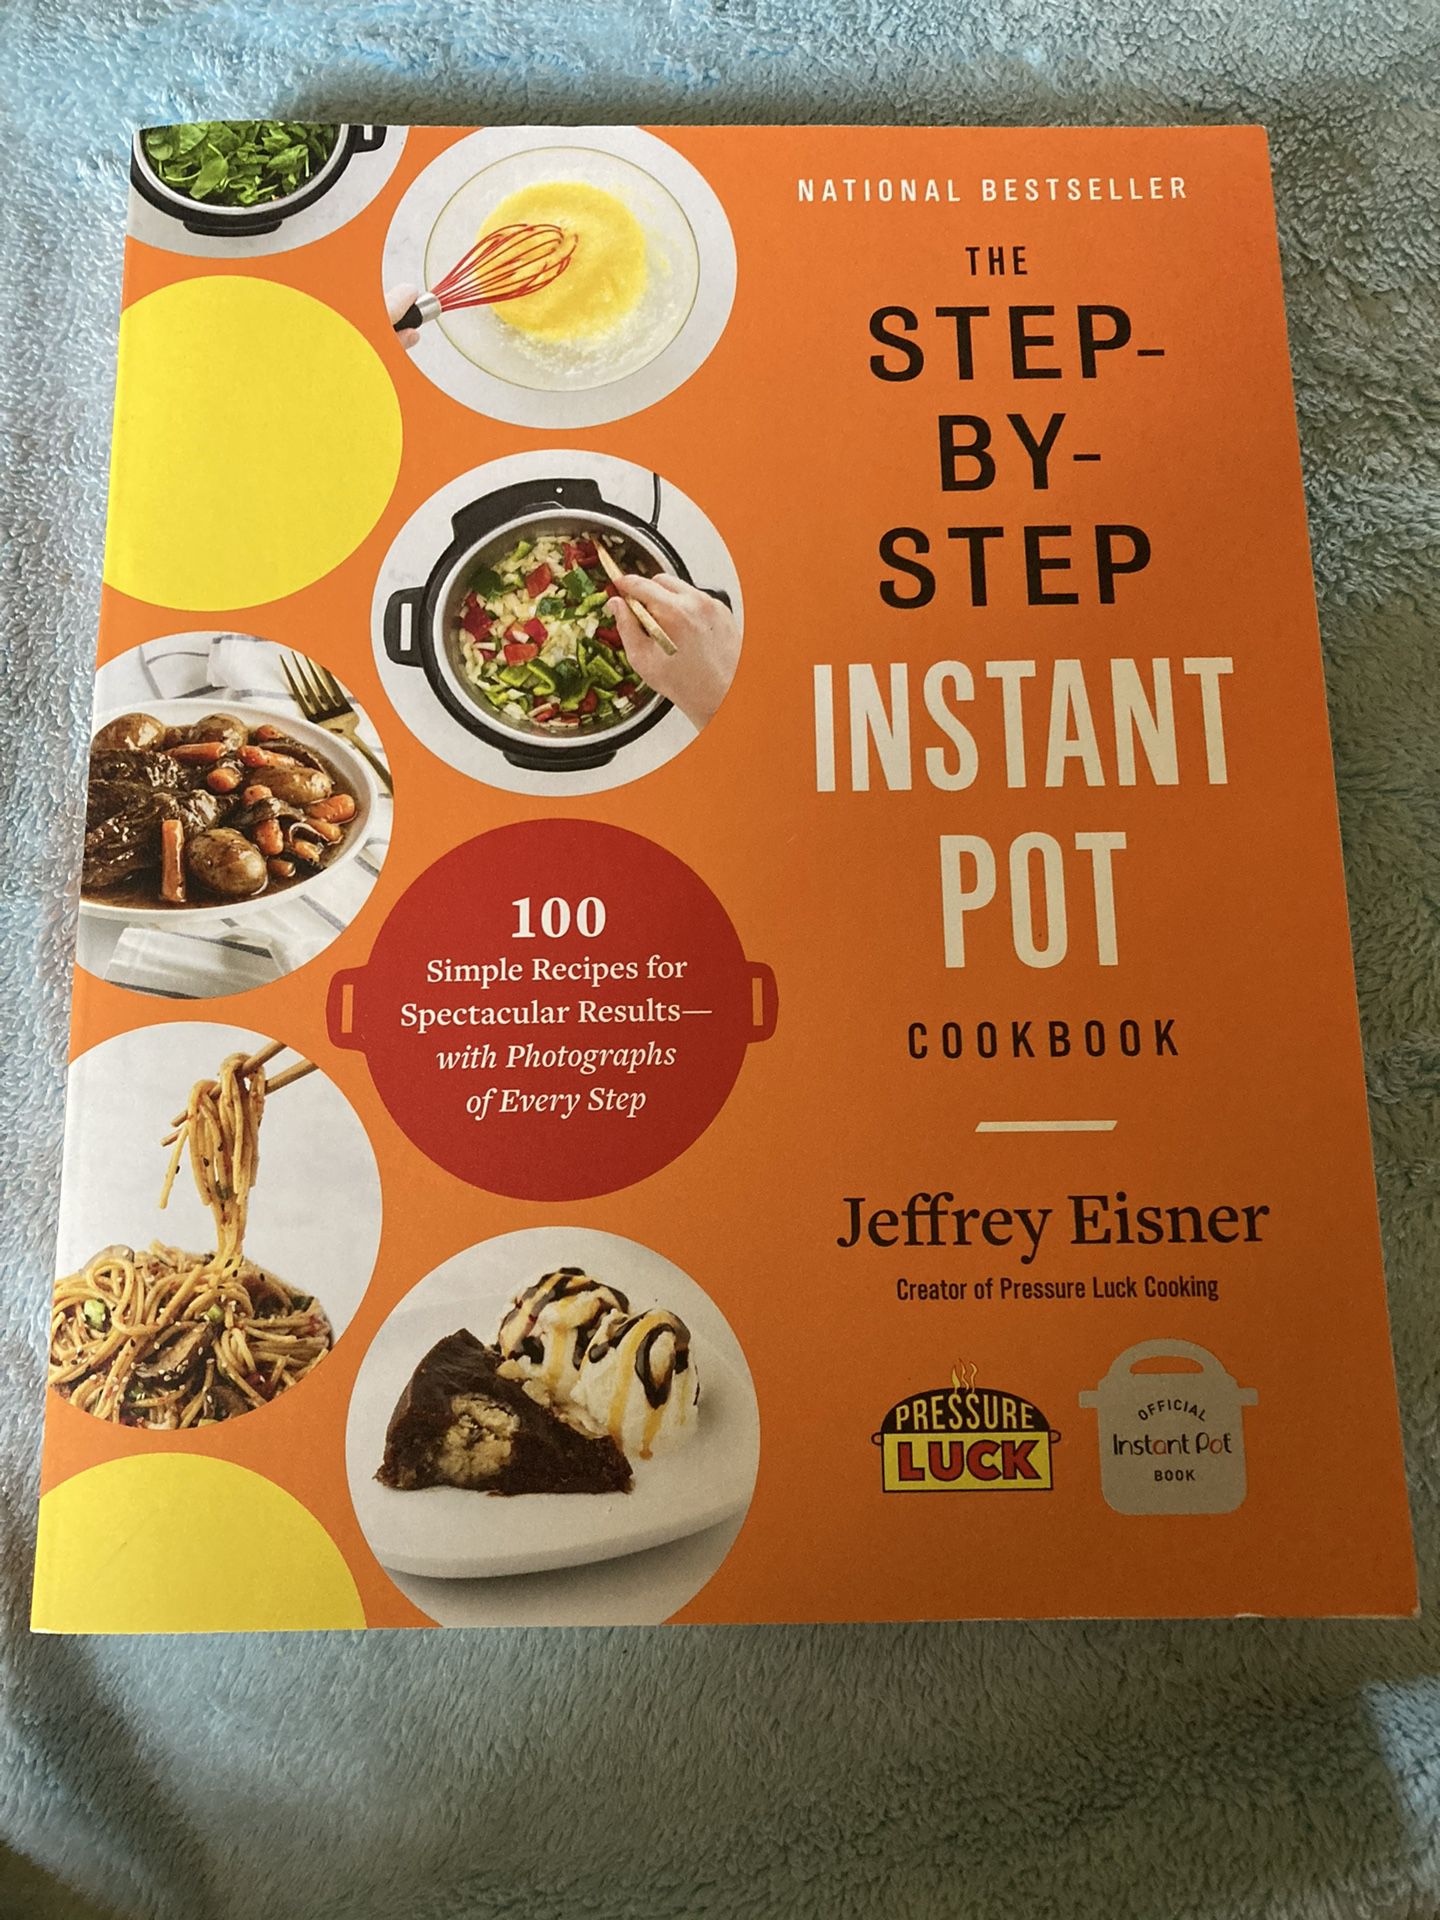 LOT OF 2 BRAND NEW COOKBOOKS FOR THE INSTANT POT